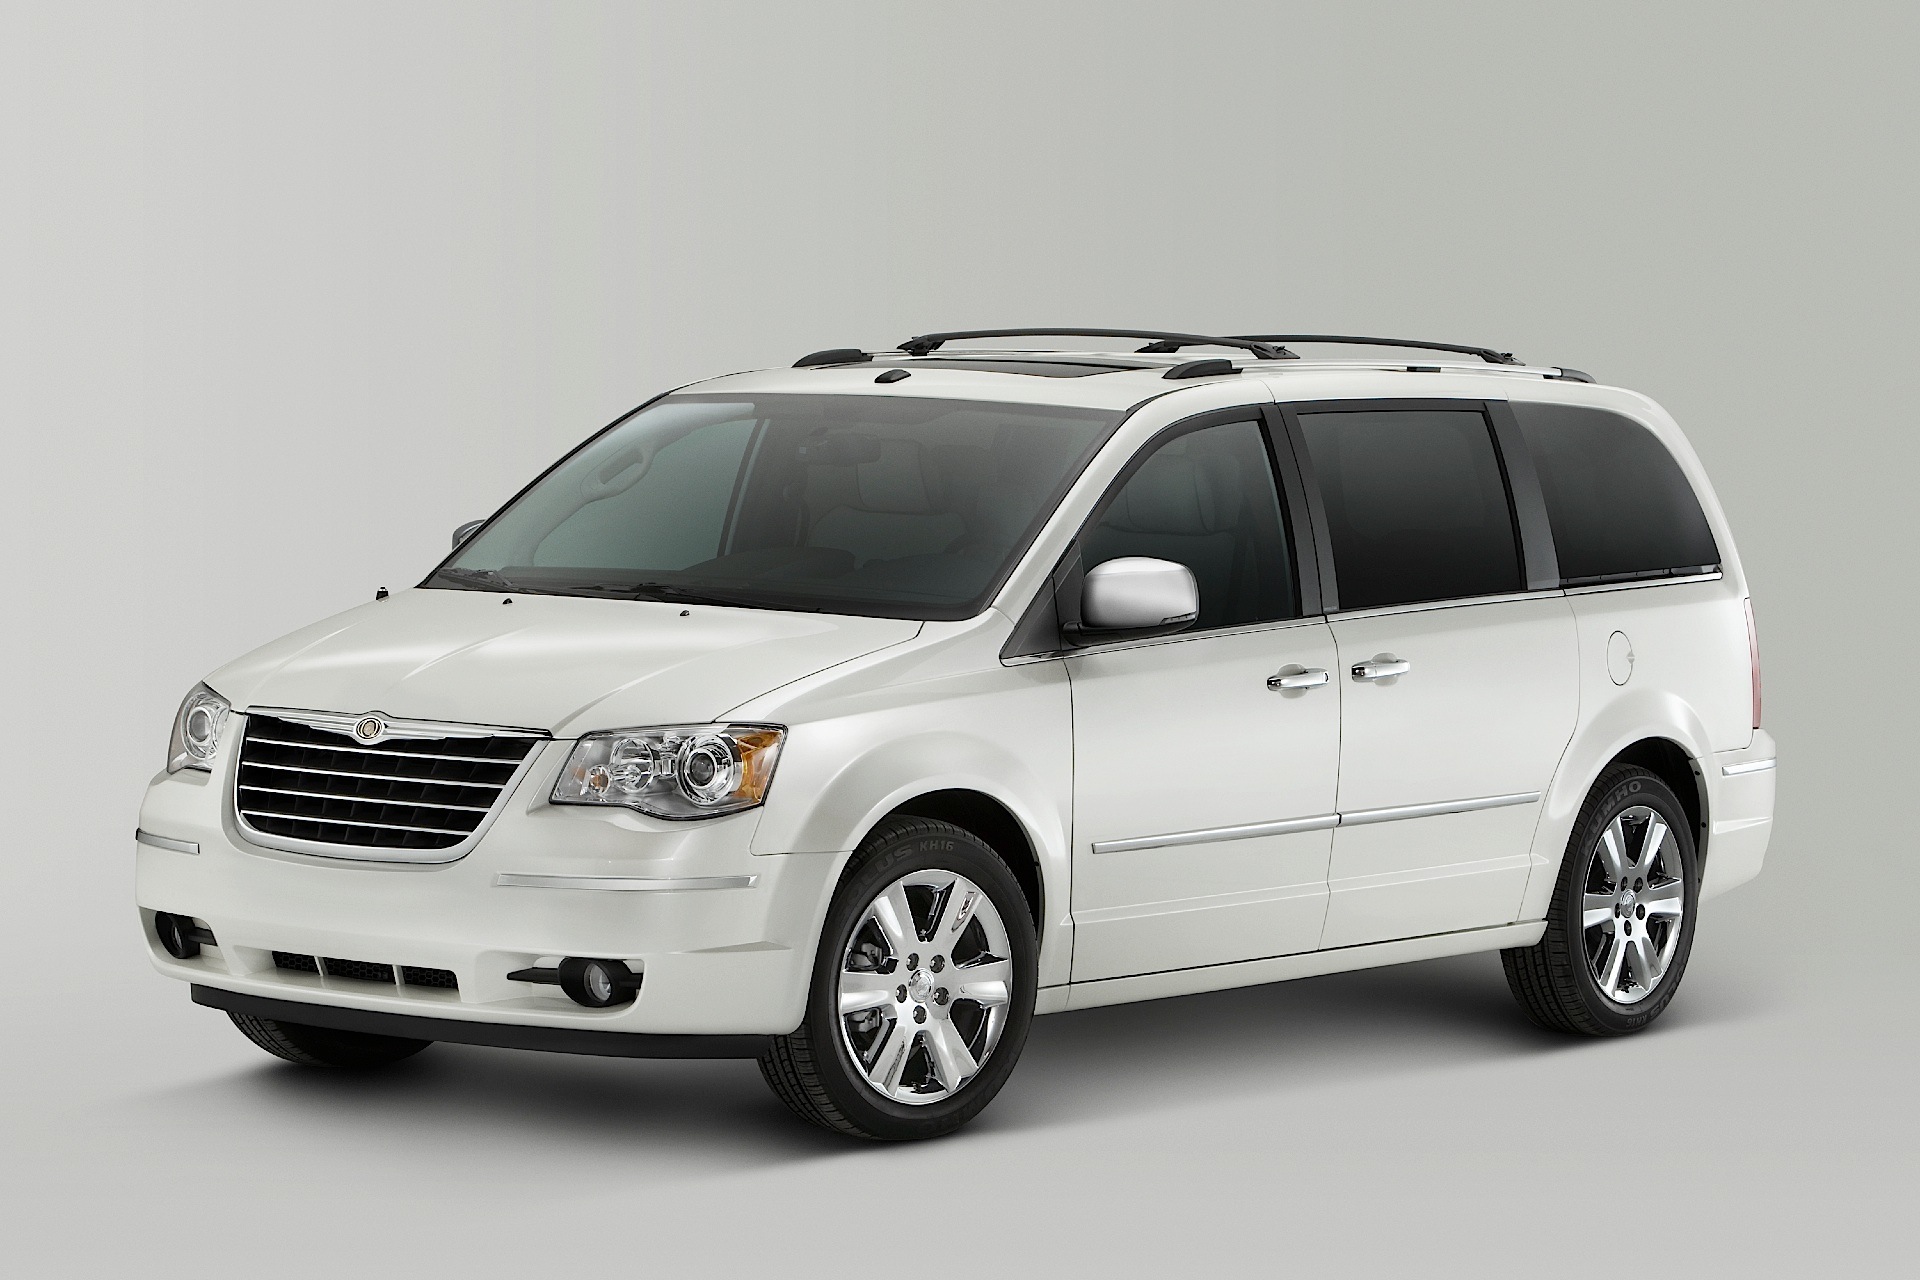 Chrysler town and country weight